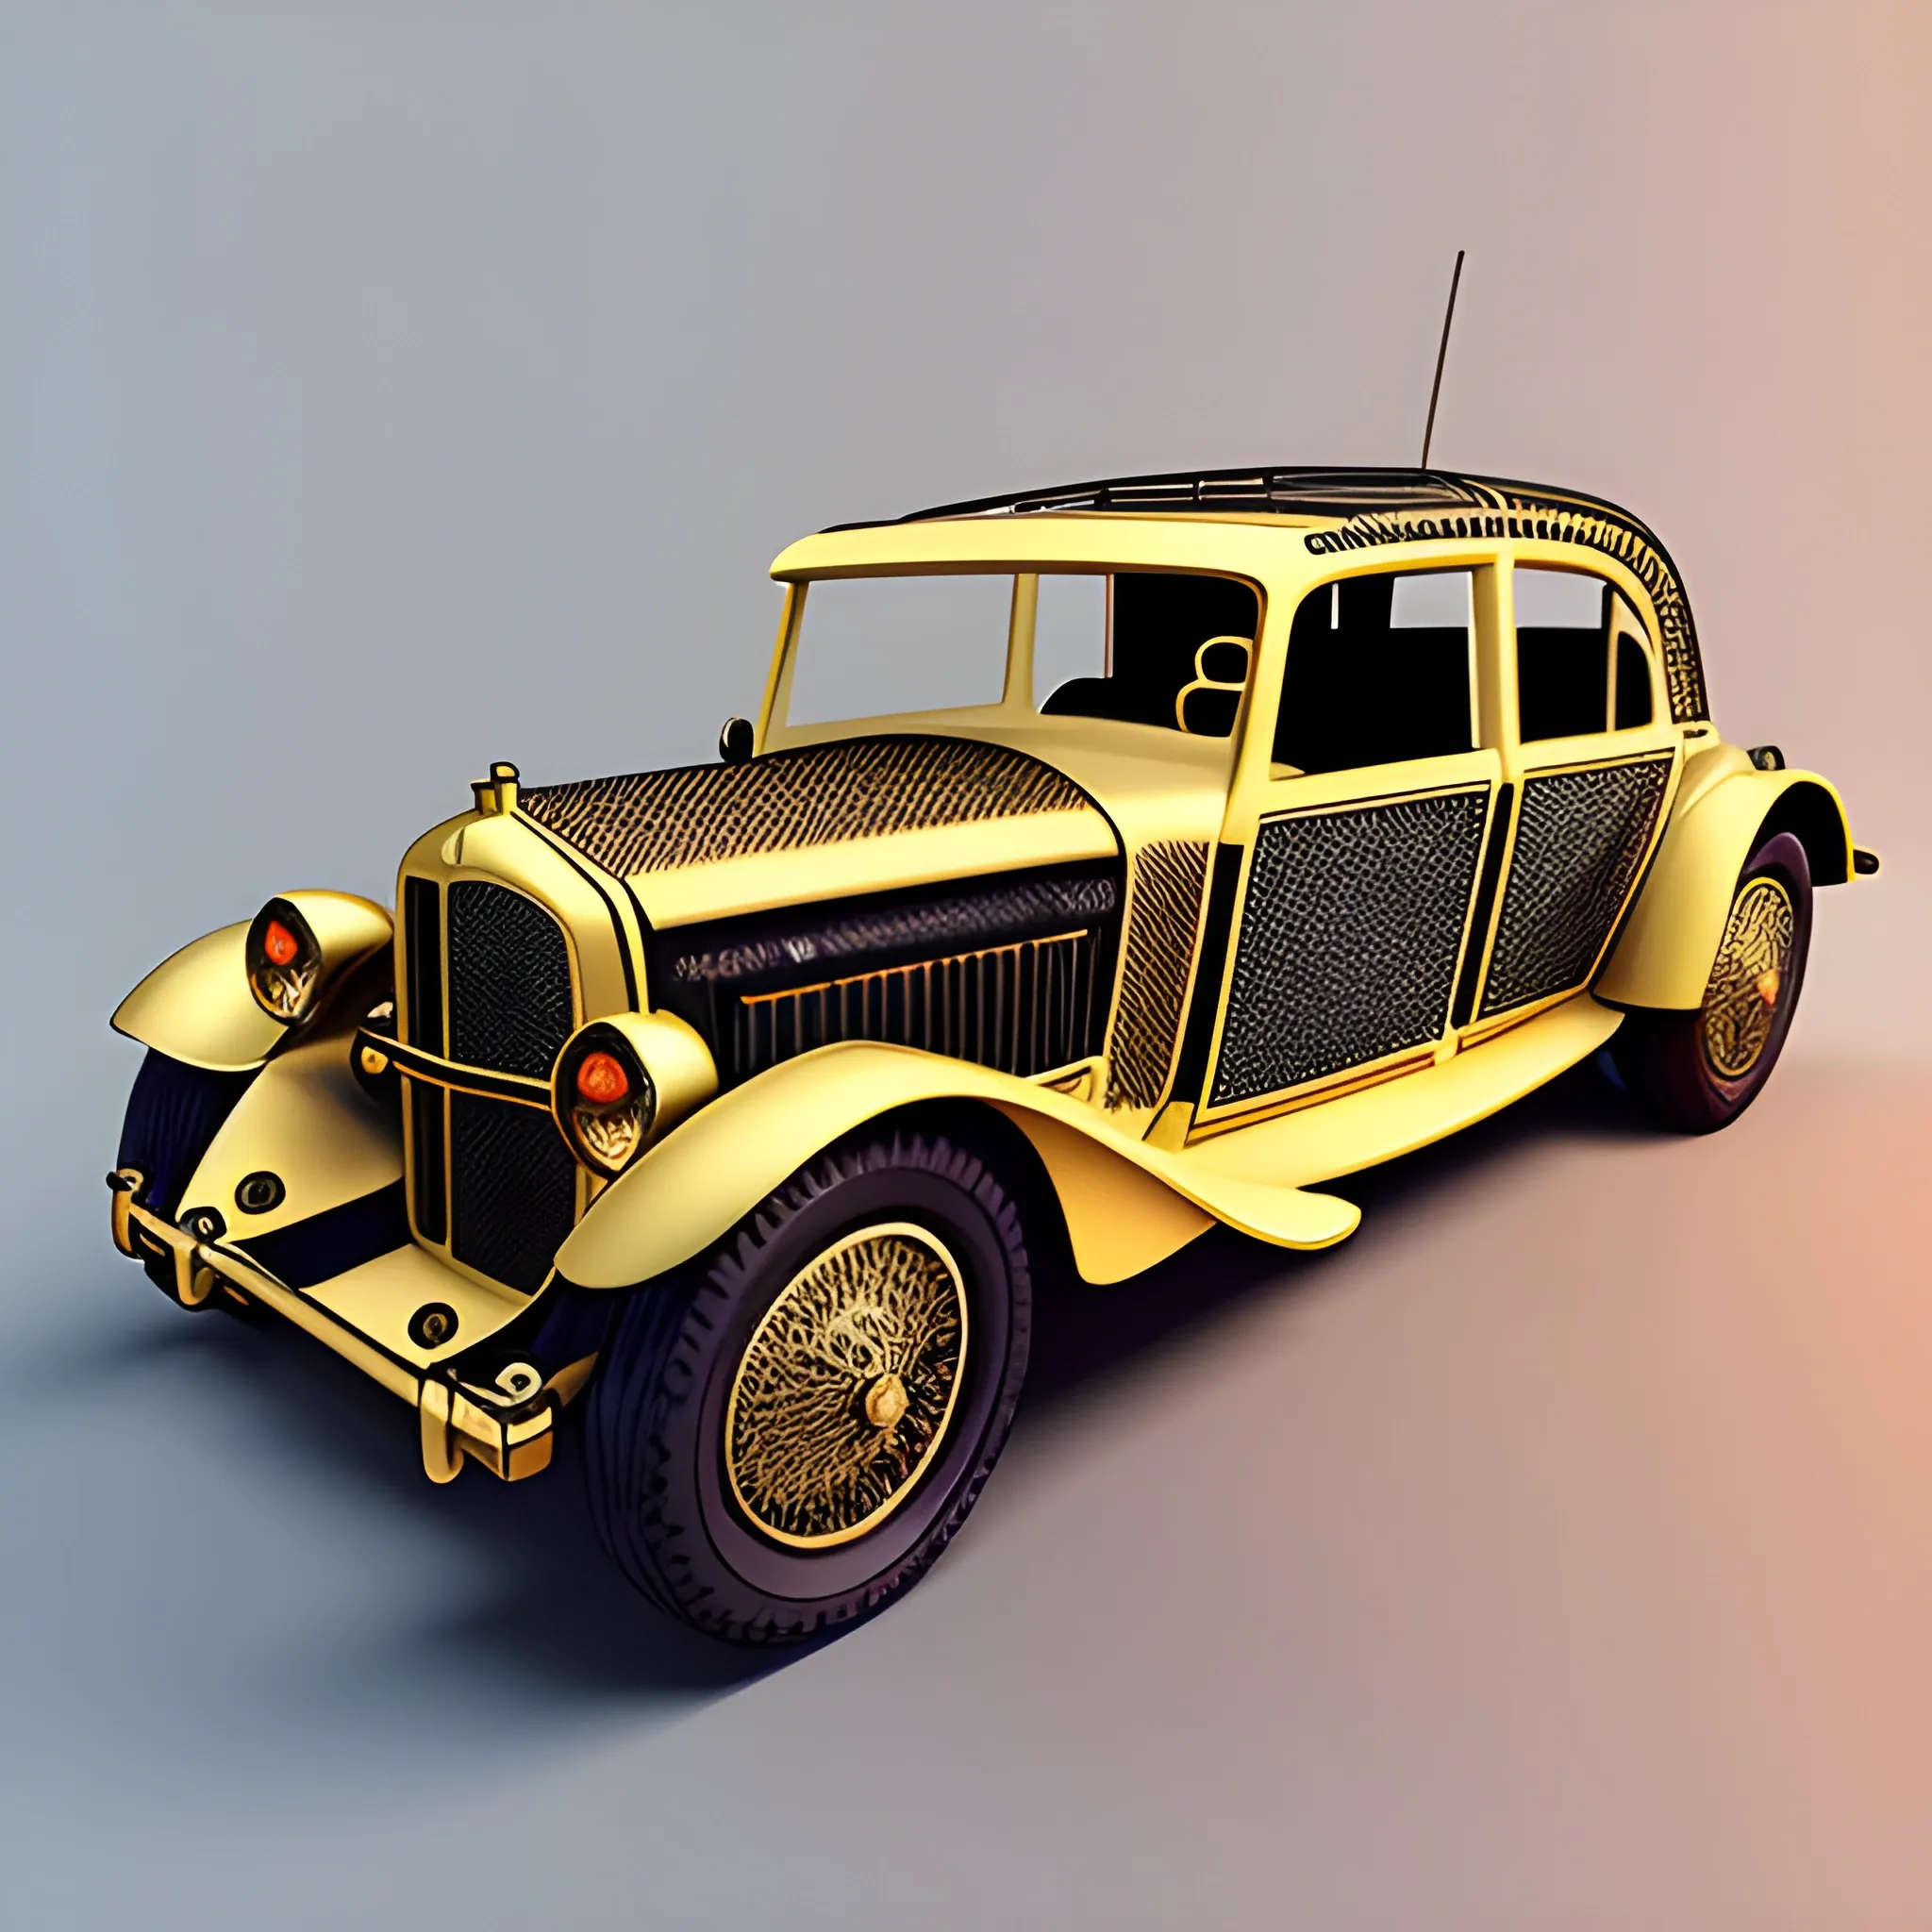 Create an eye-catching visual of a vintage empala with an exploded view that showcases the intricate details and mechanics of the vehicle. Use the golden hour lighting effect to highlight the elegance and beauty of the car and add rim lighting to accentuate its exterior. Create a sense of movement and action by adding a sense of wind and speed, and make sure to use a dramatic lighting effect with heavy contrast that creates a cinematic style. --ar 7:4, 3D